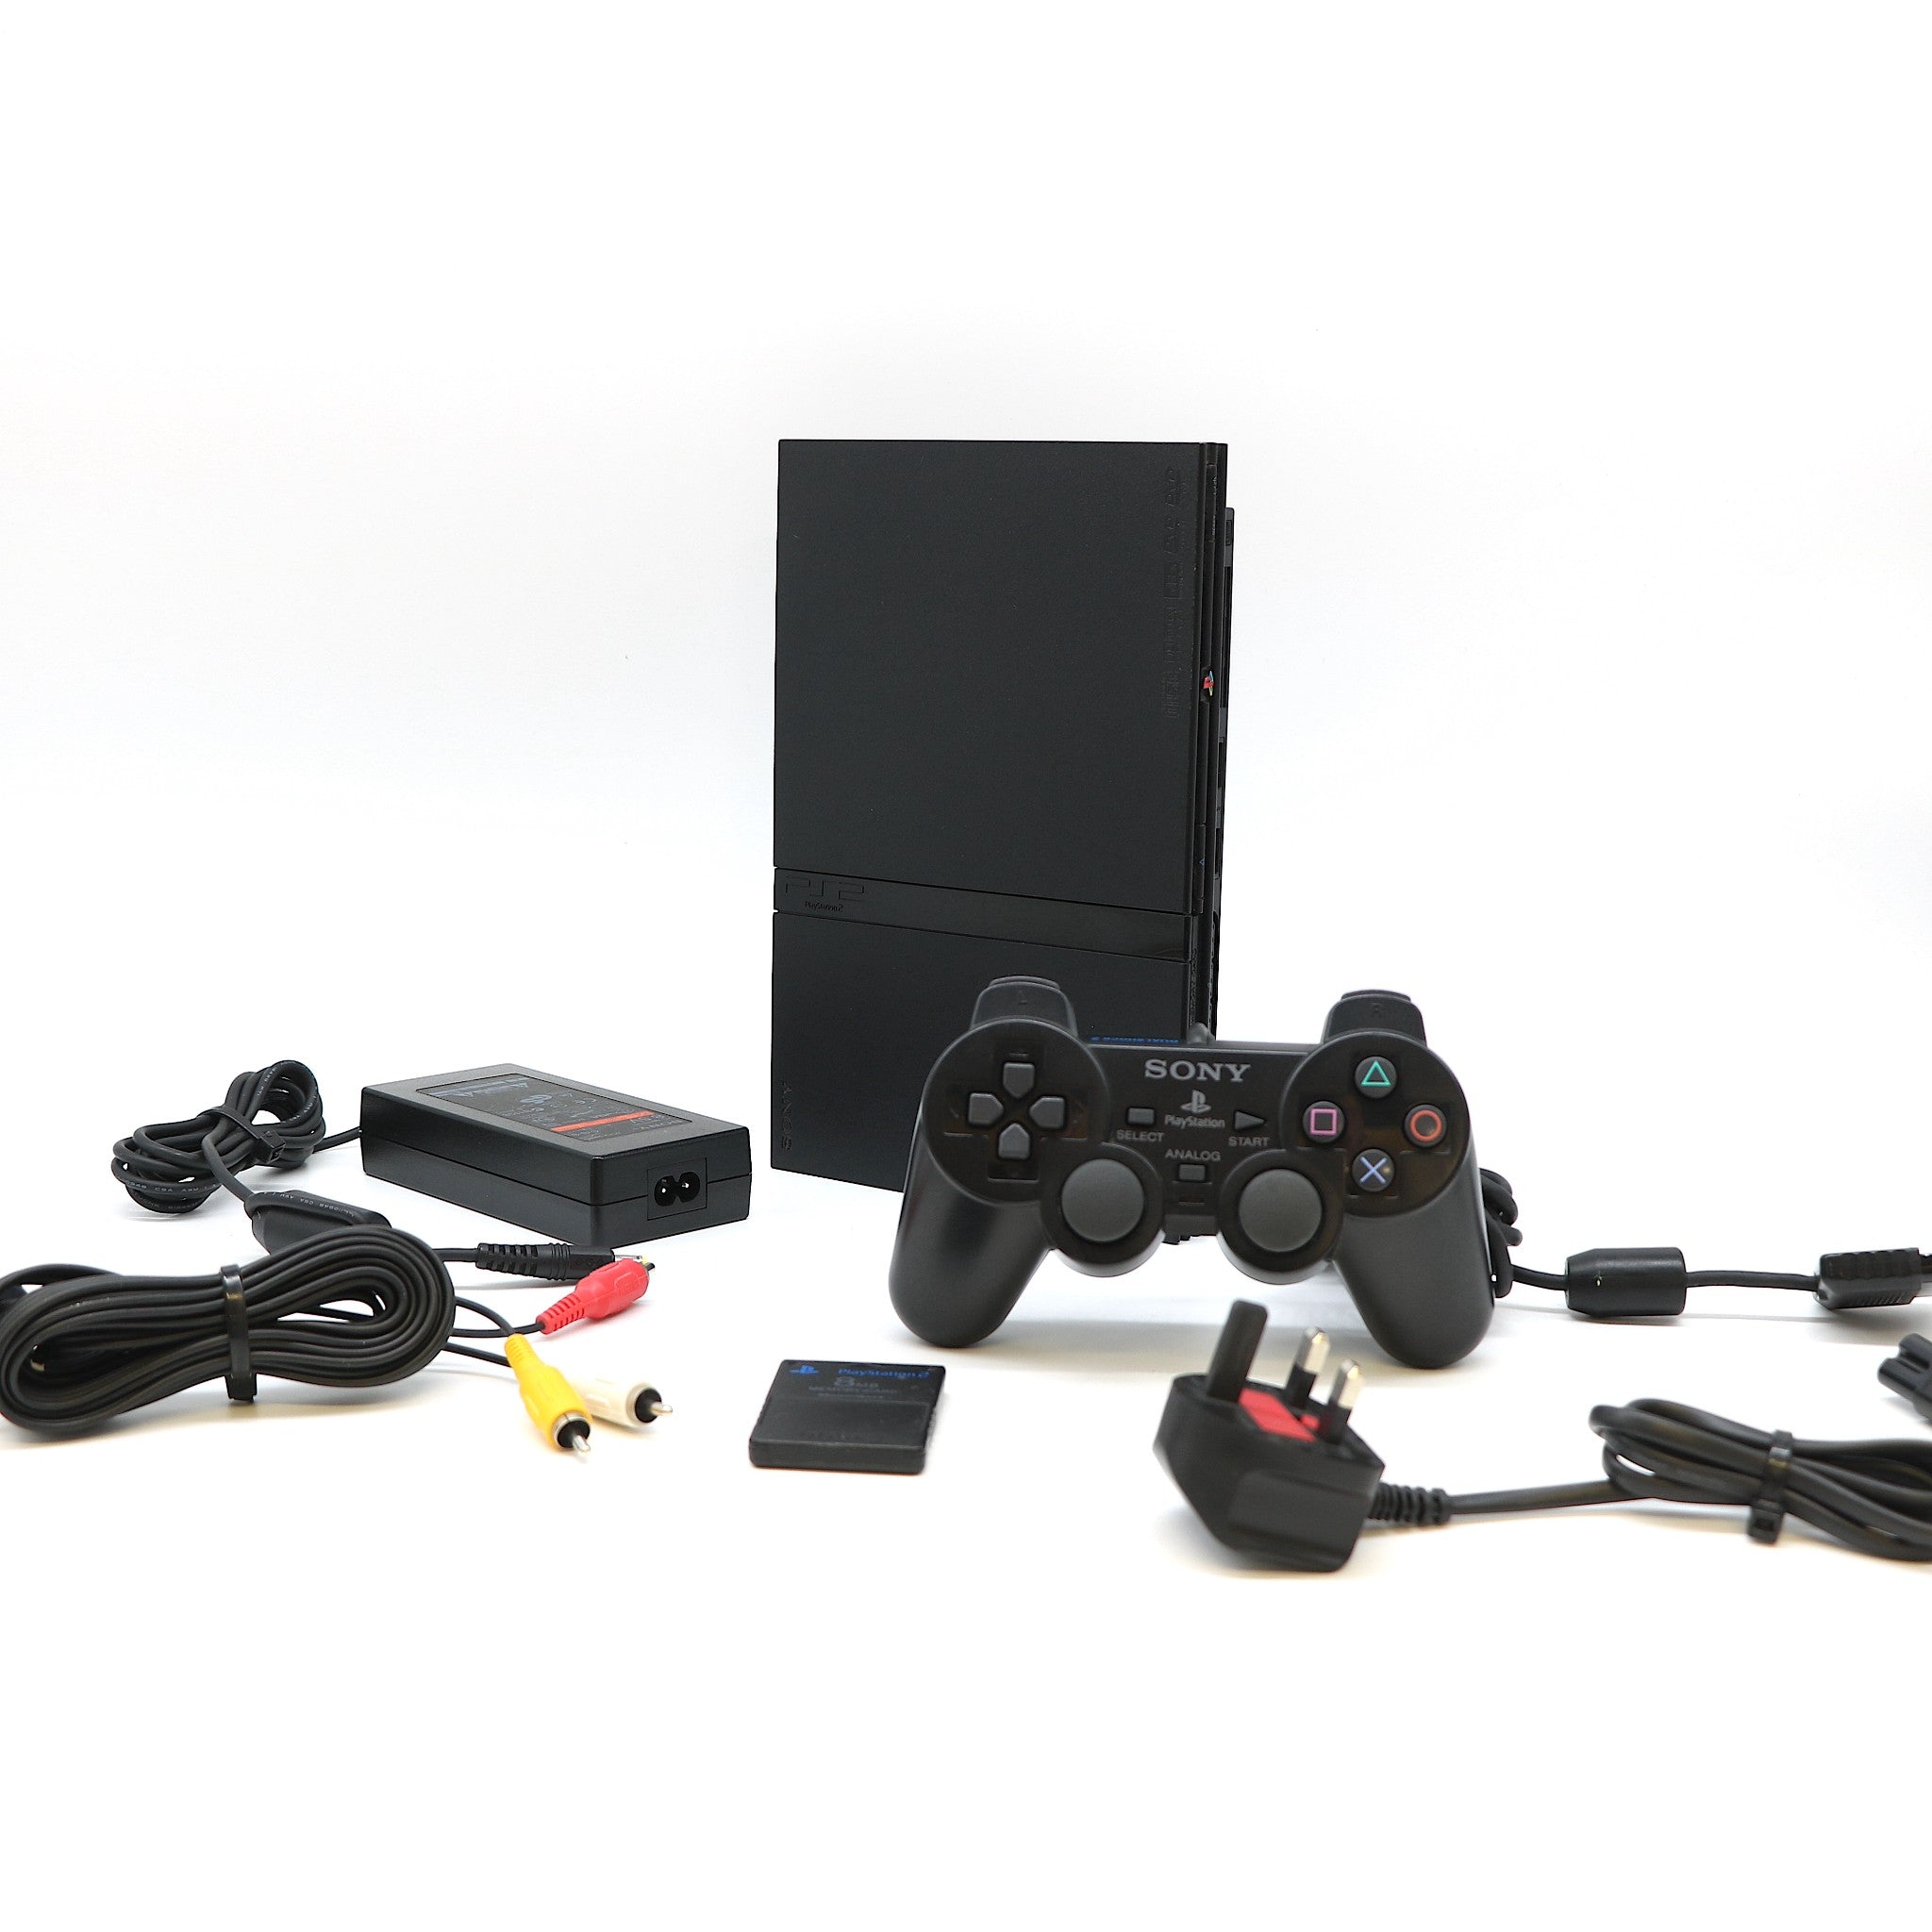 Black Slimline Slim Sony PS2 Console With Pad & 8MB Card | Mint Condition!